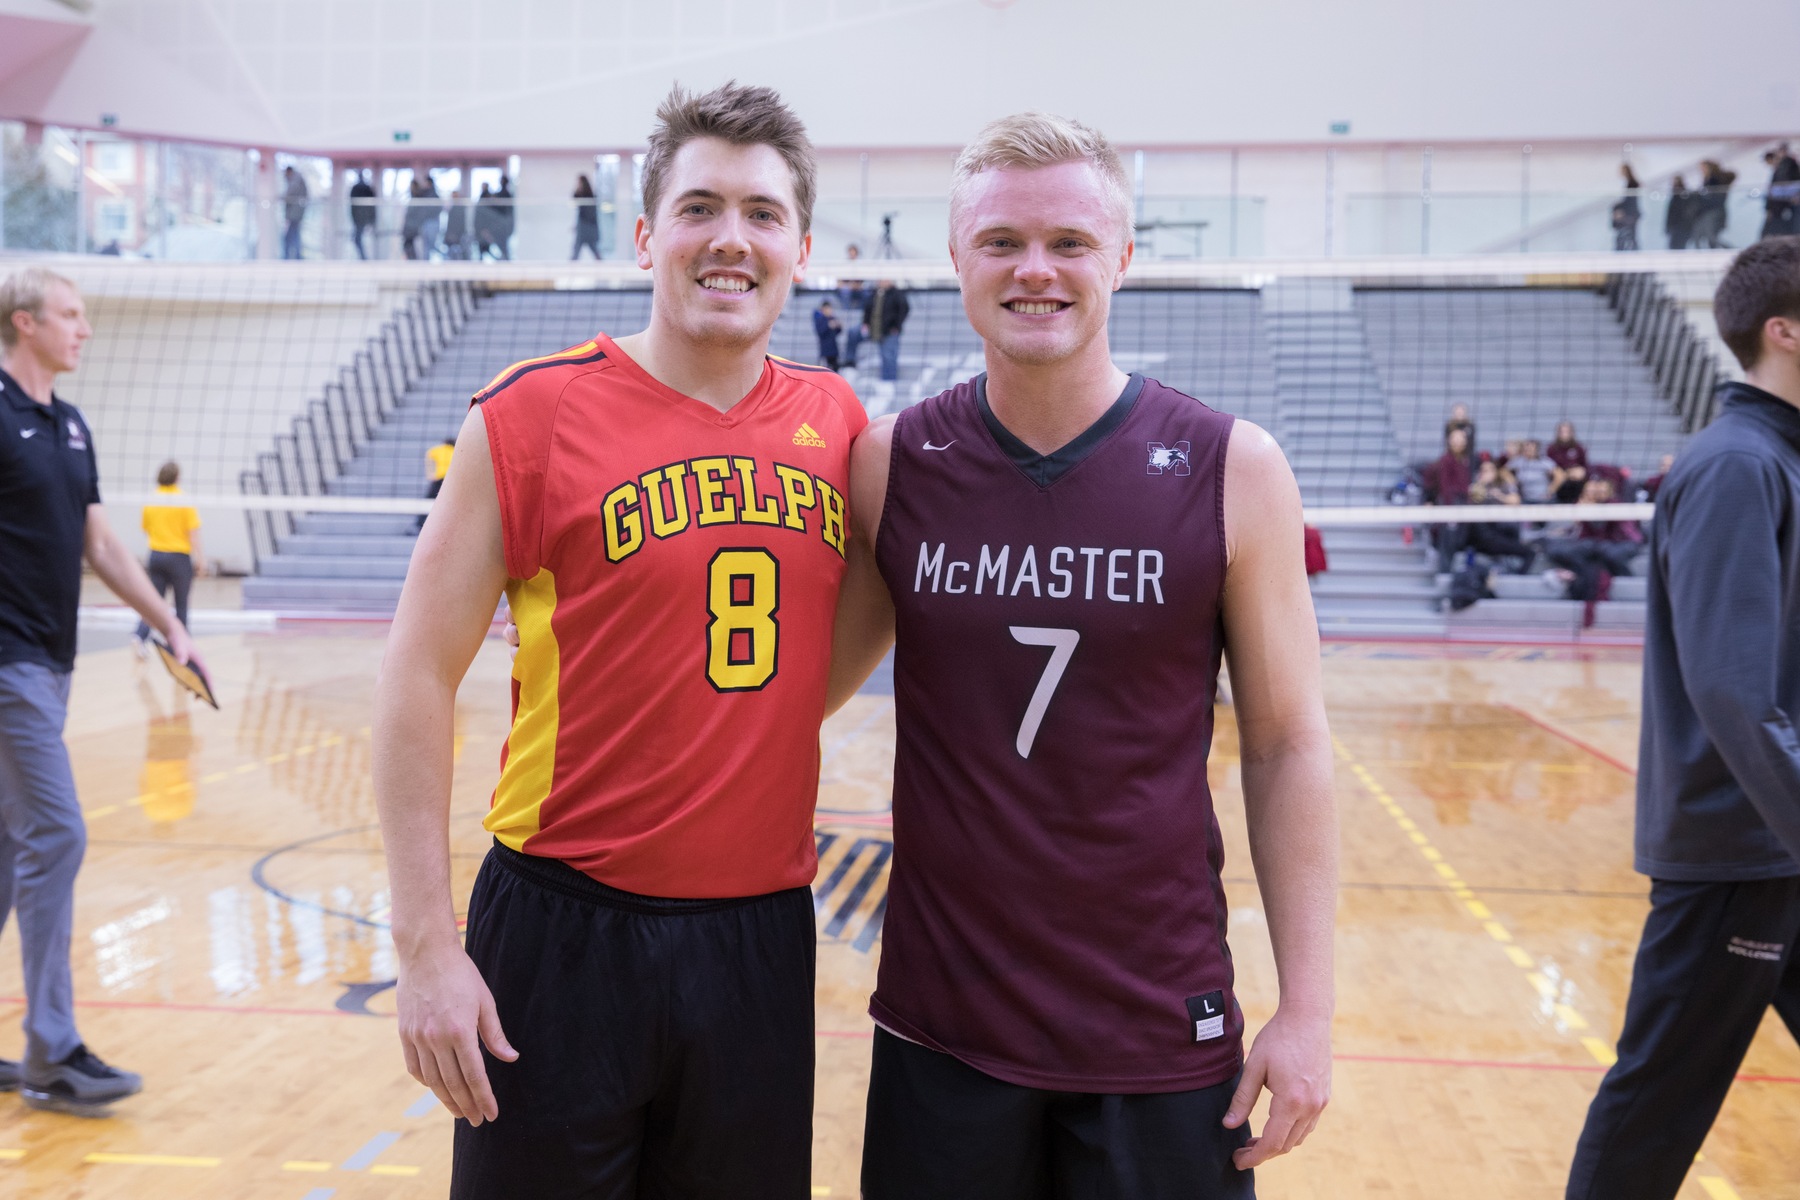 Both Kyle and Andrew’s teams play in the OUA West Division and therefore, the brothers have had to face each other twice this season alone and six times over the course of their university careers.